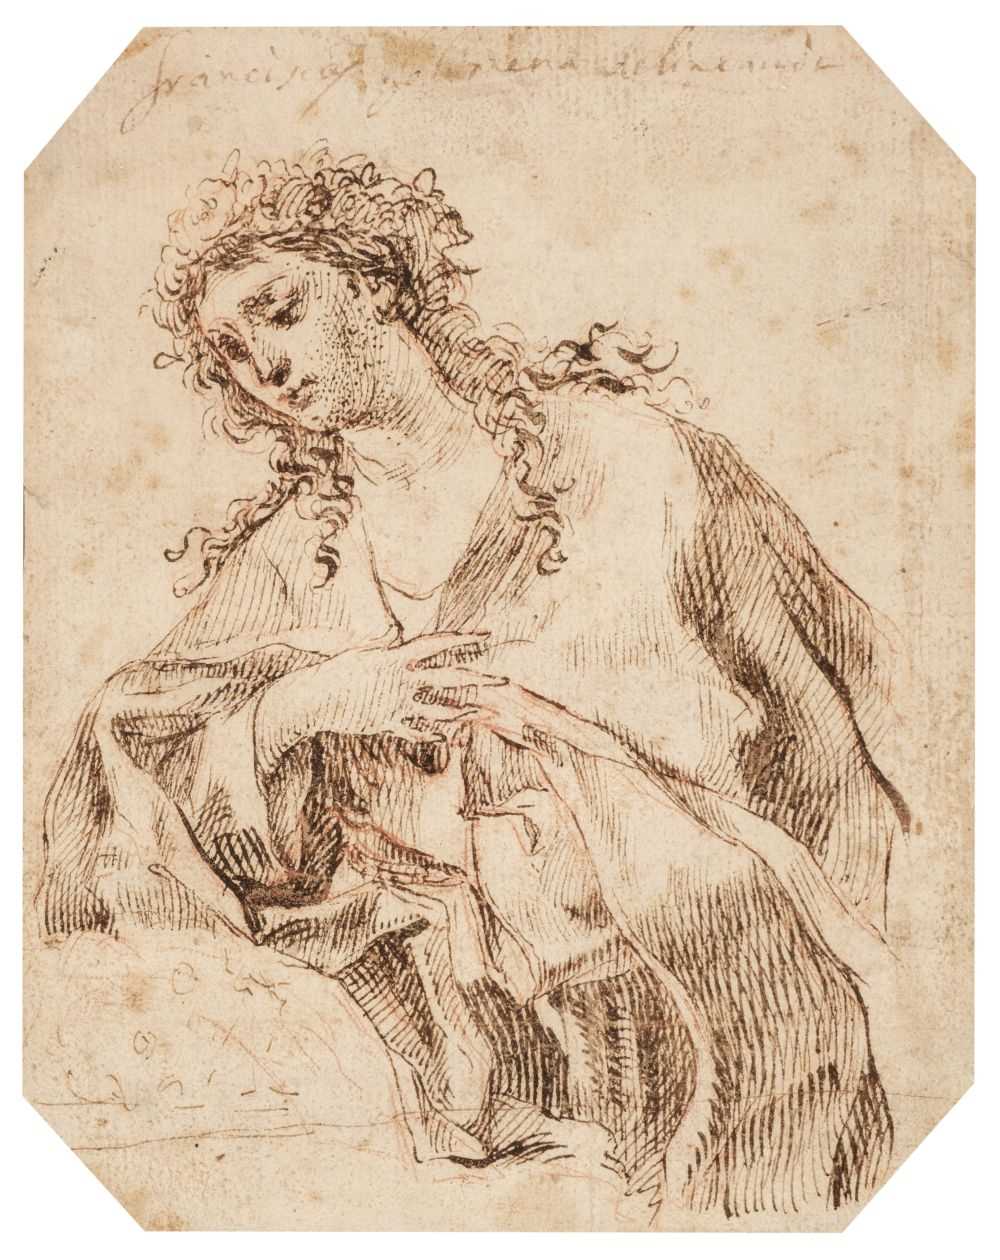 Lot 235 - Reni, Guido, Attributed to, Study of Abigail, drawing in pen and brown ink over red crayon